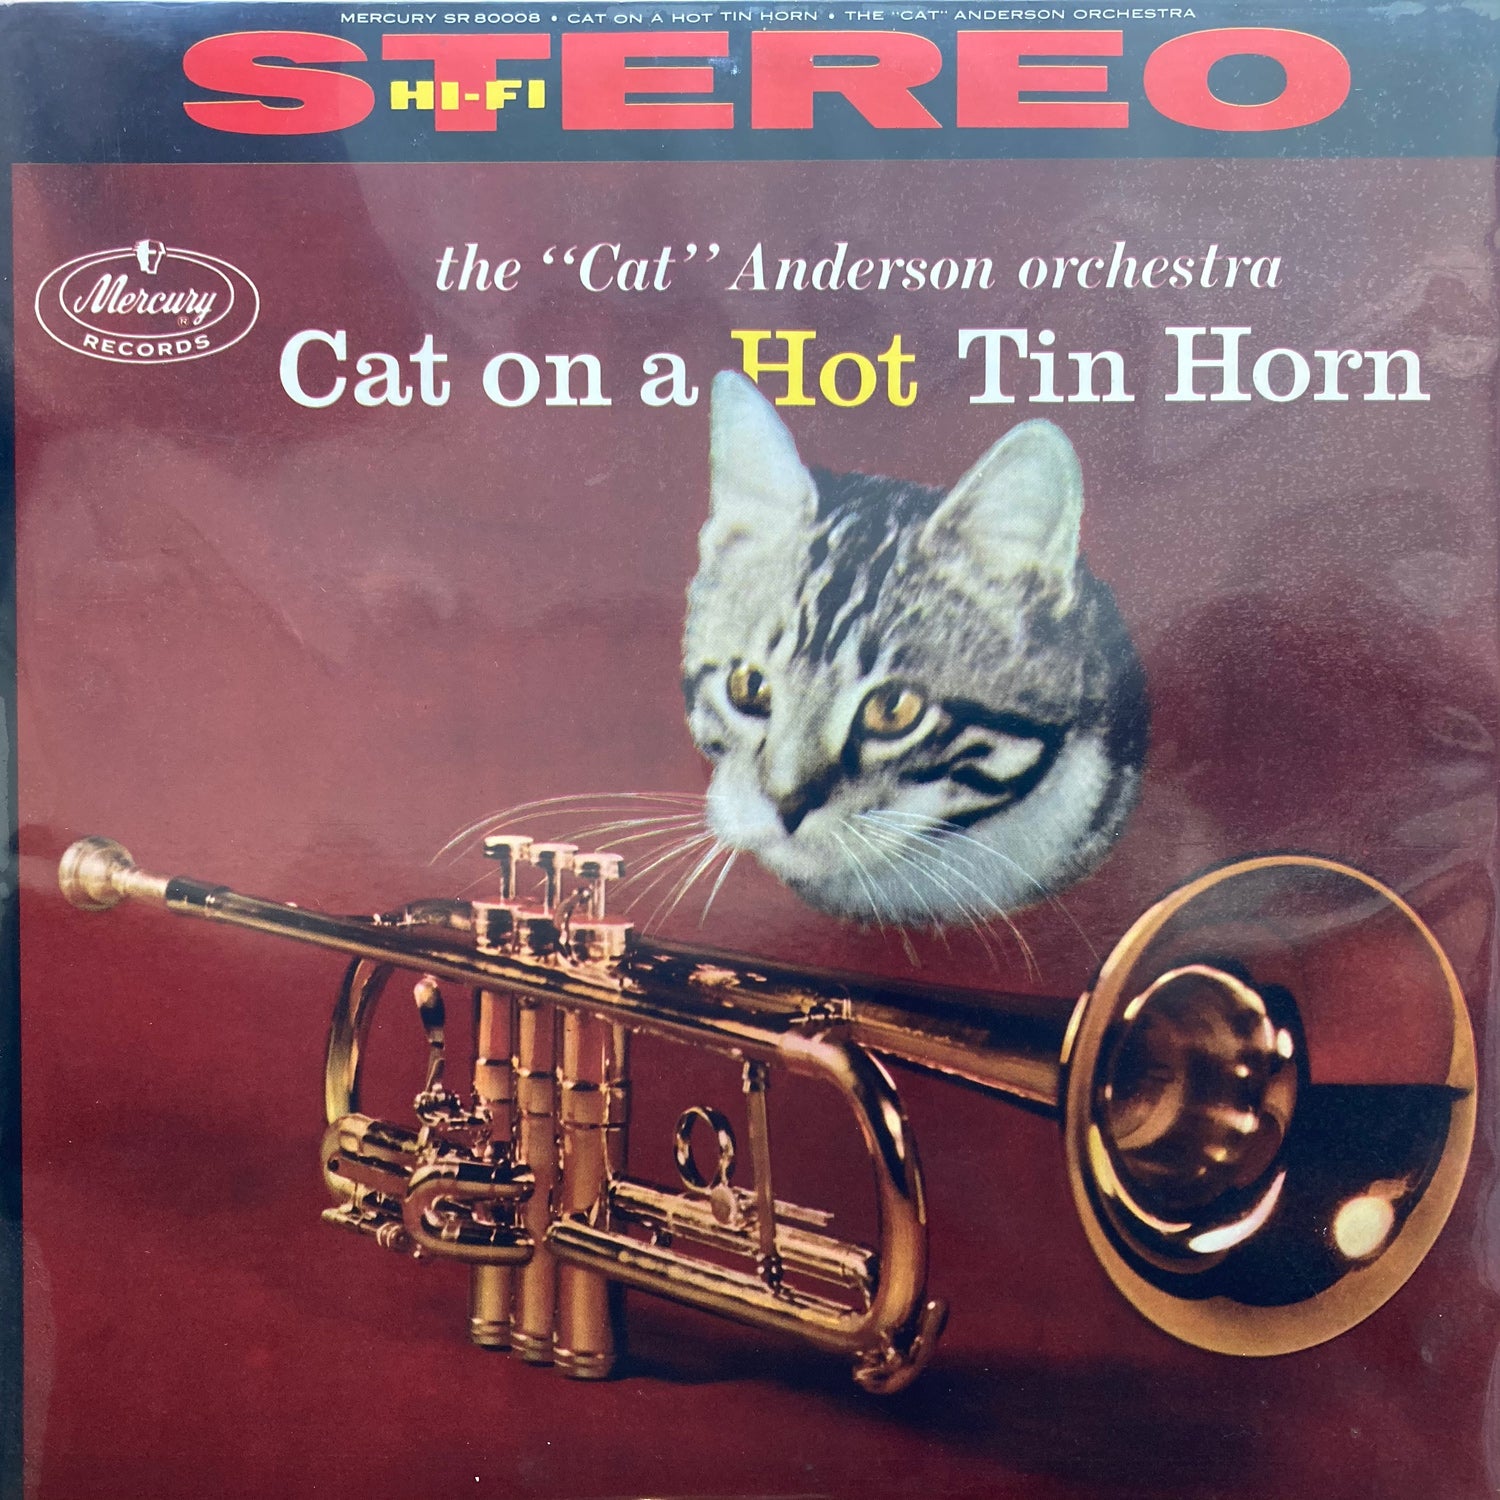 Cat Anderson Orchestra - Cat on a Hot Tin Horn